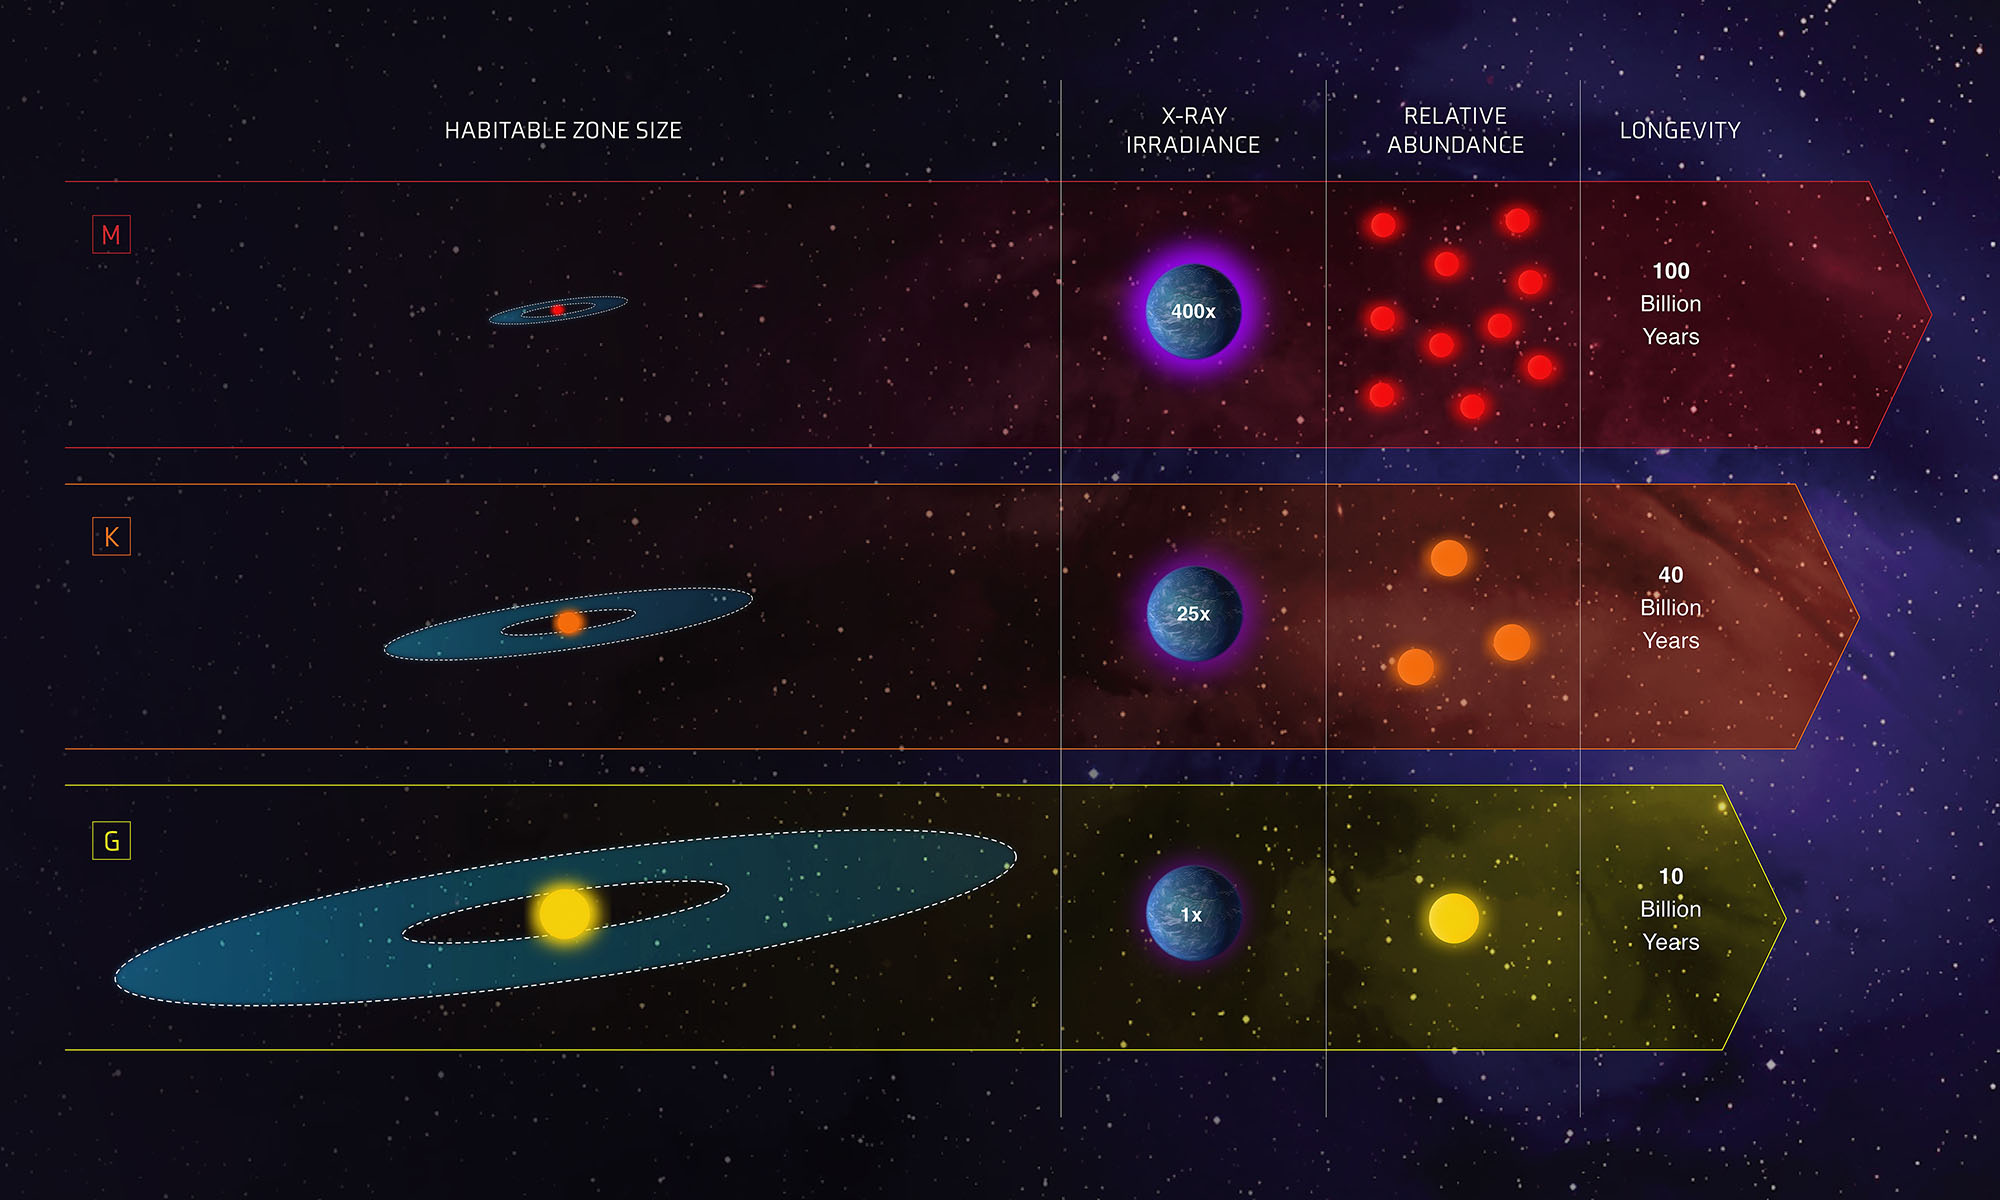 Infographic with 3 rows comparing the habitale zone size for 3 different types of stars, M, K, G.